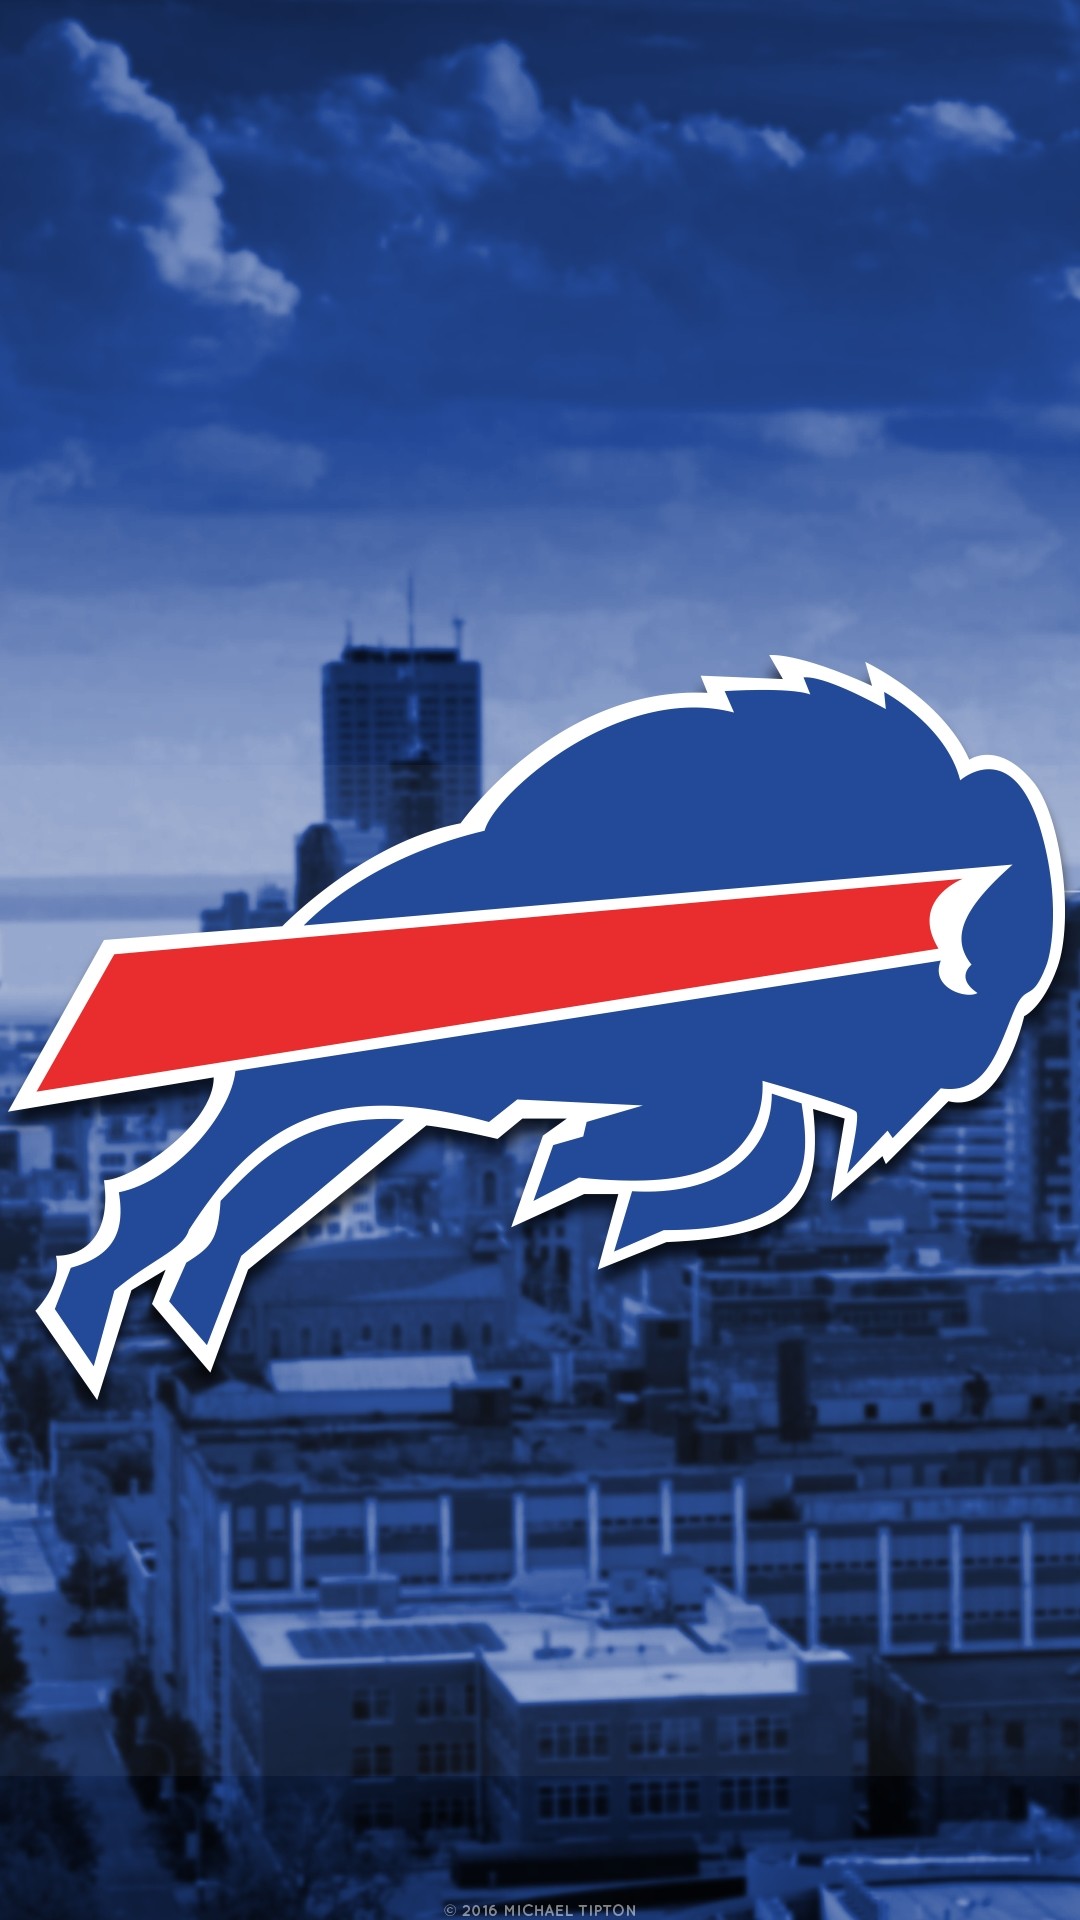 1080x1920 Title : 2018 buffalo bills wallpapers – pc |iphone| android. Dimension :  1080 x 1920. File Type : JPG/JPEG. 10 Most Popular ...